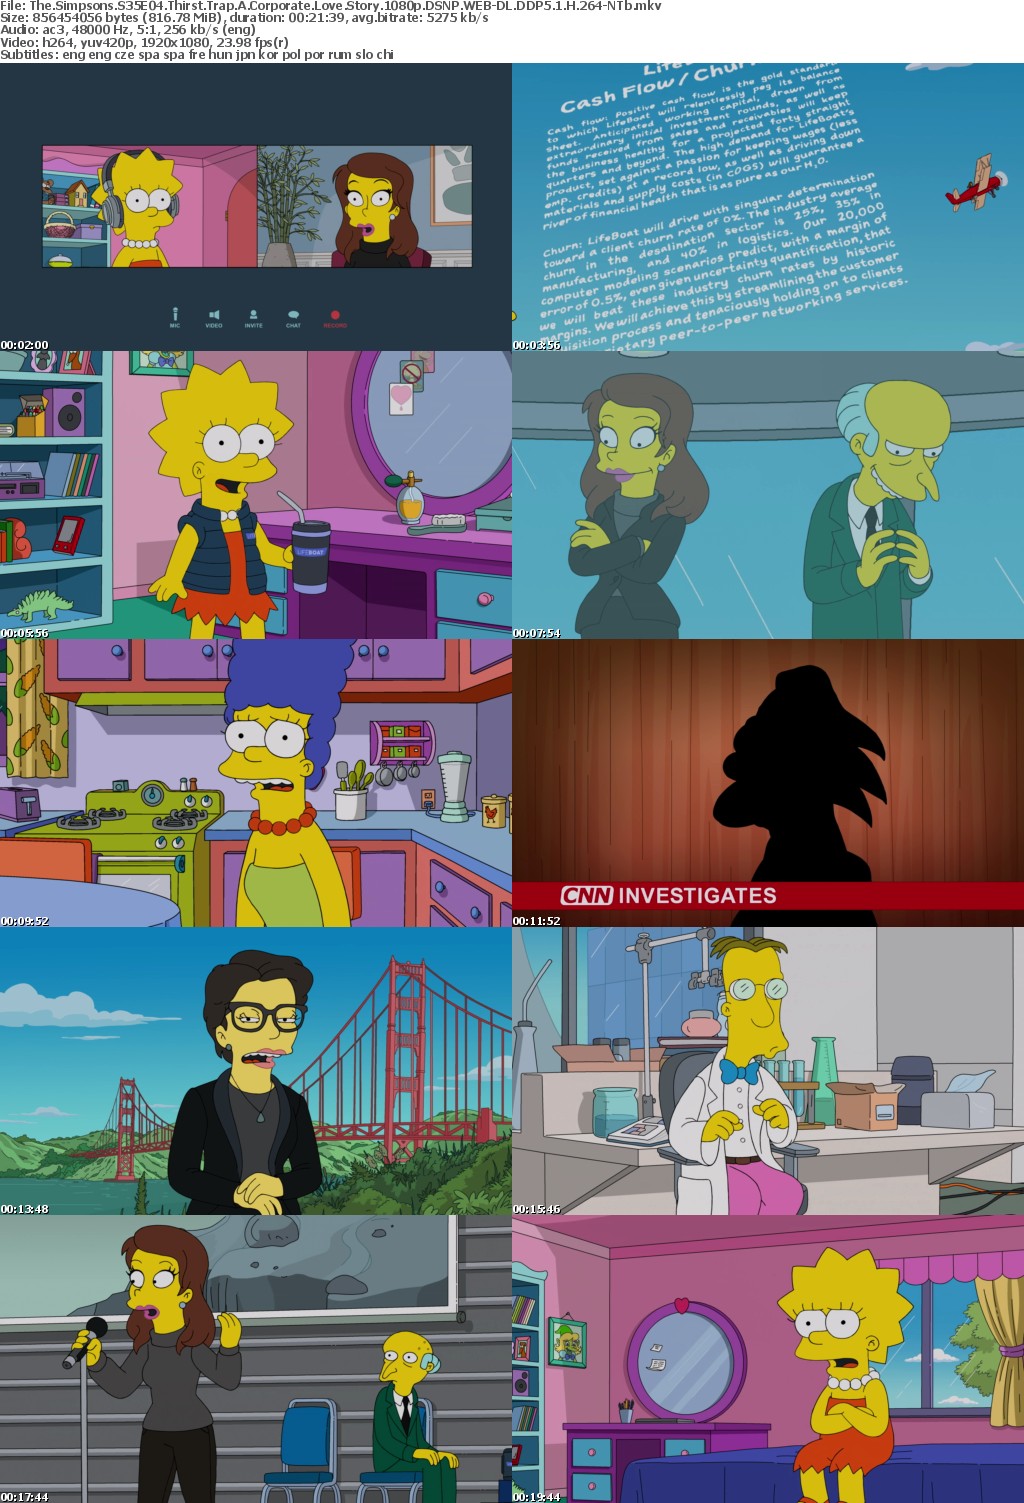 The Simpsons S35E04 Thirst Trap A Corporate Love Story 1080p DSNP WEB-DL DDP5 1 H 264-NTb